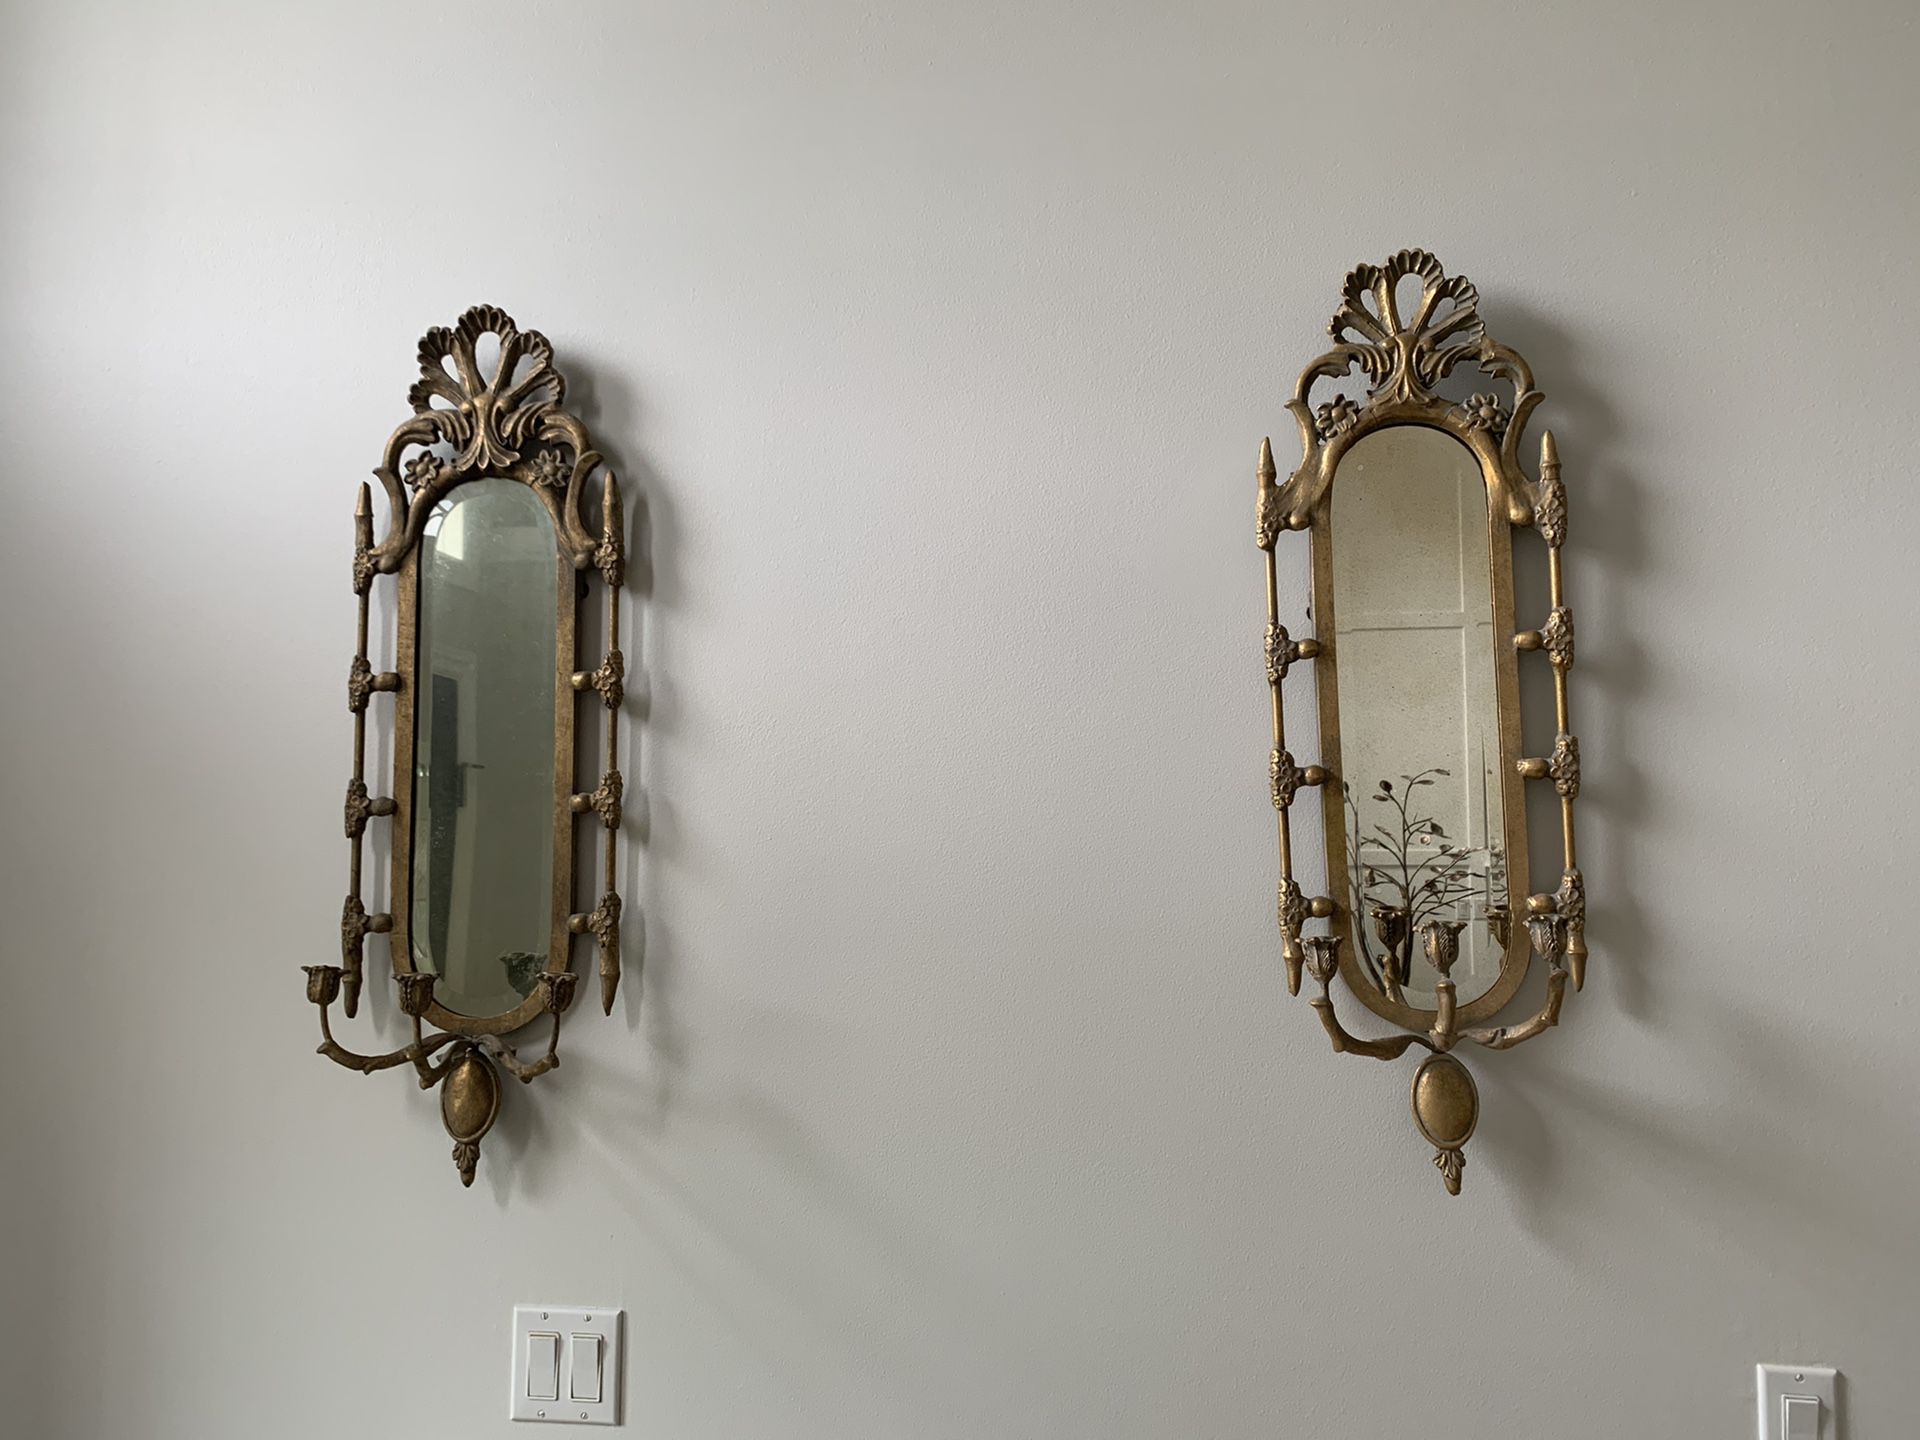 Mirrored candle holder Wall sconces from horchow